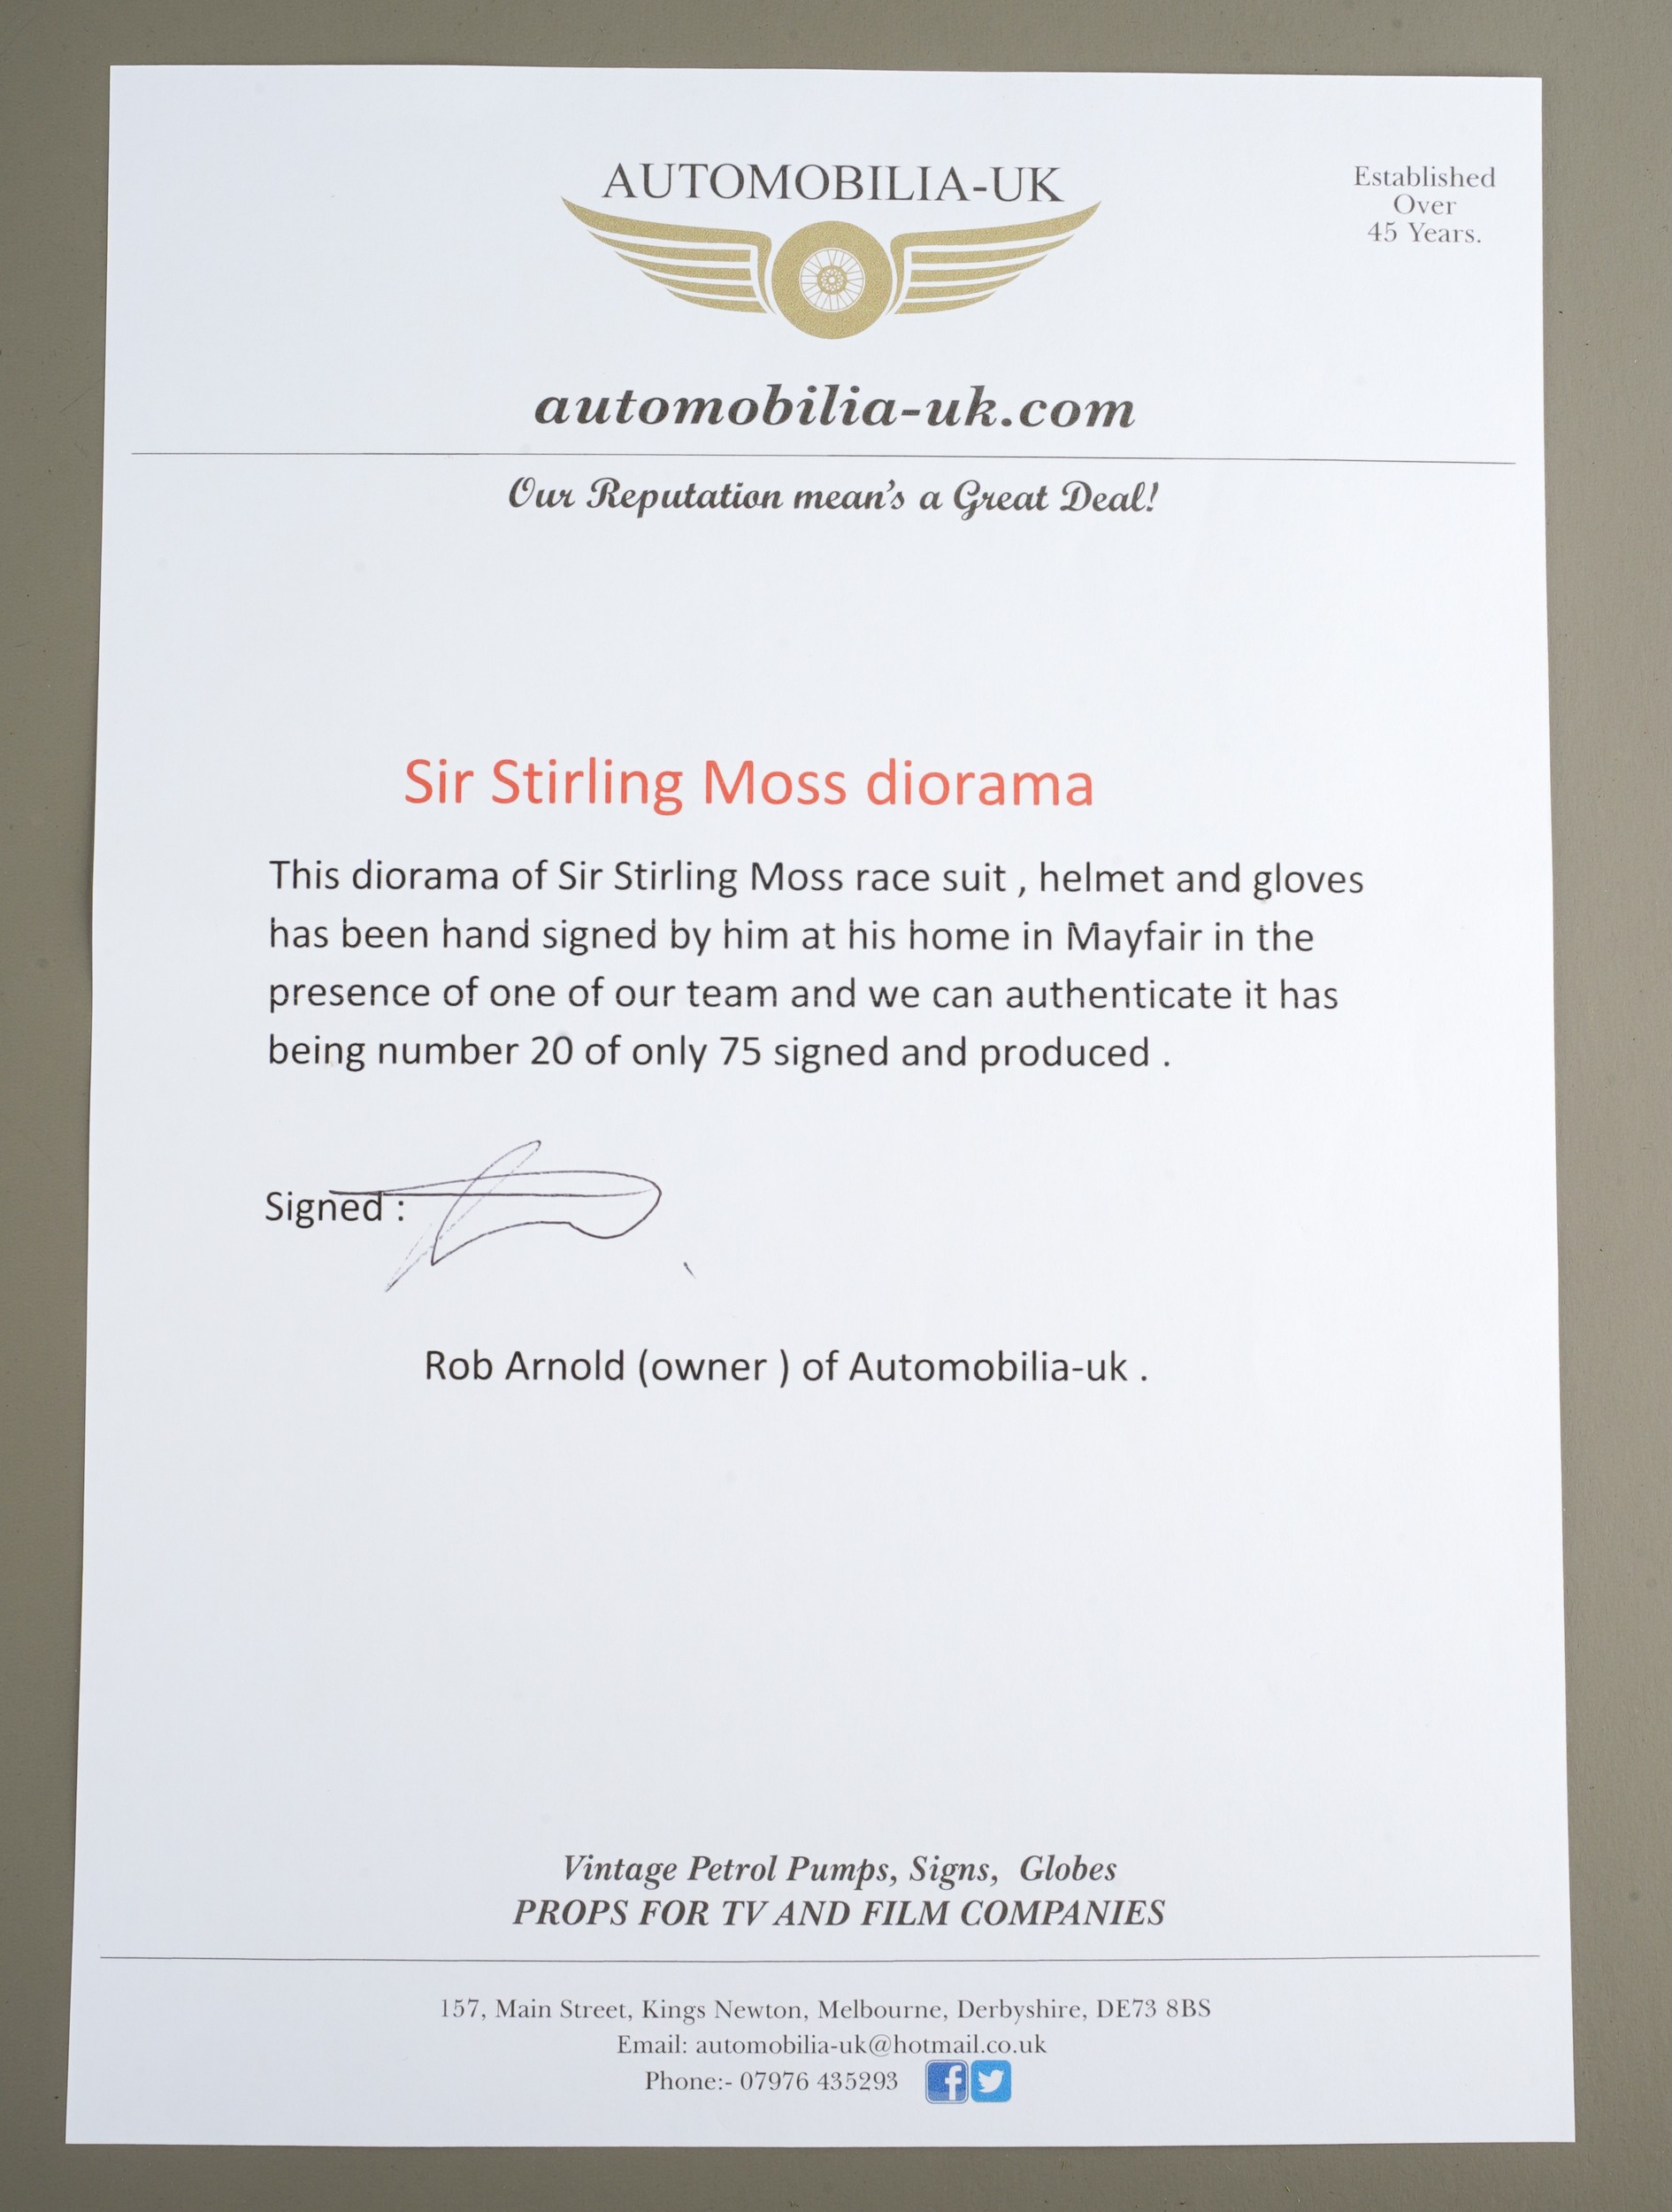 Motor racing interest - "Mr Motor Racing" - Sir Stirling Moss OBE: A limited edition 20/75 diorama - Image 3 of 3